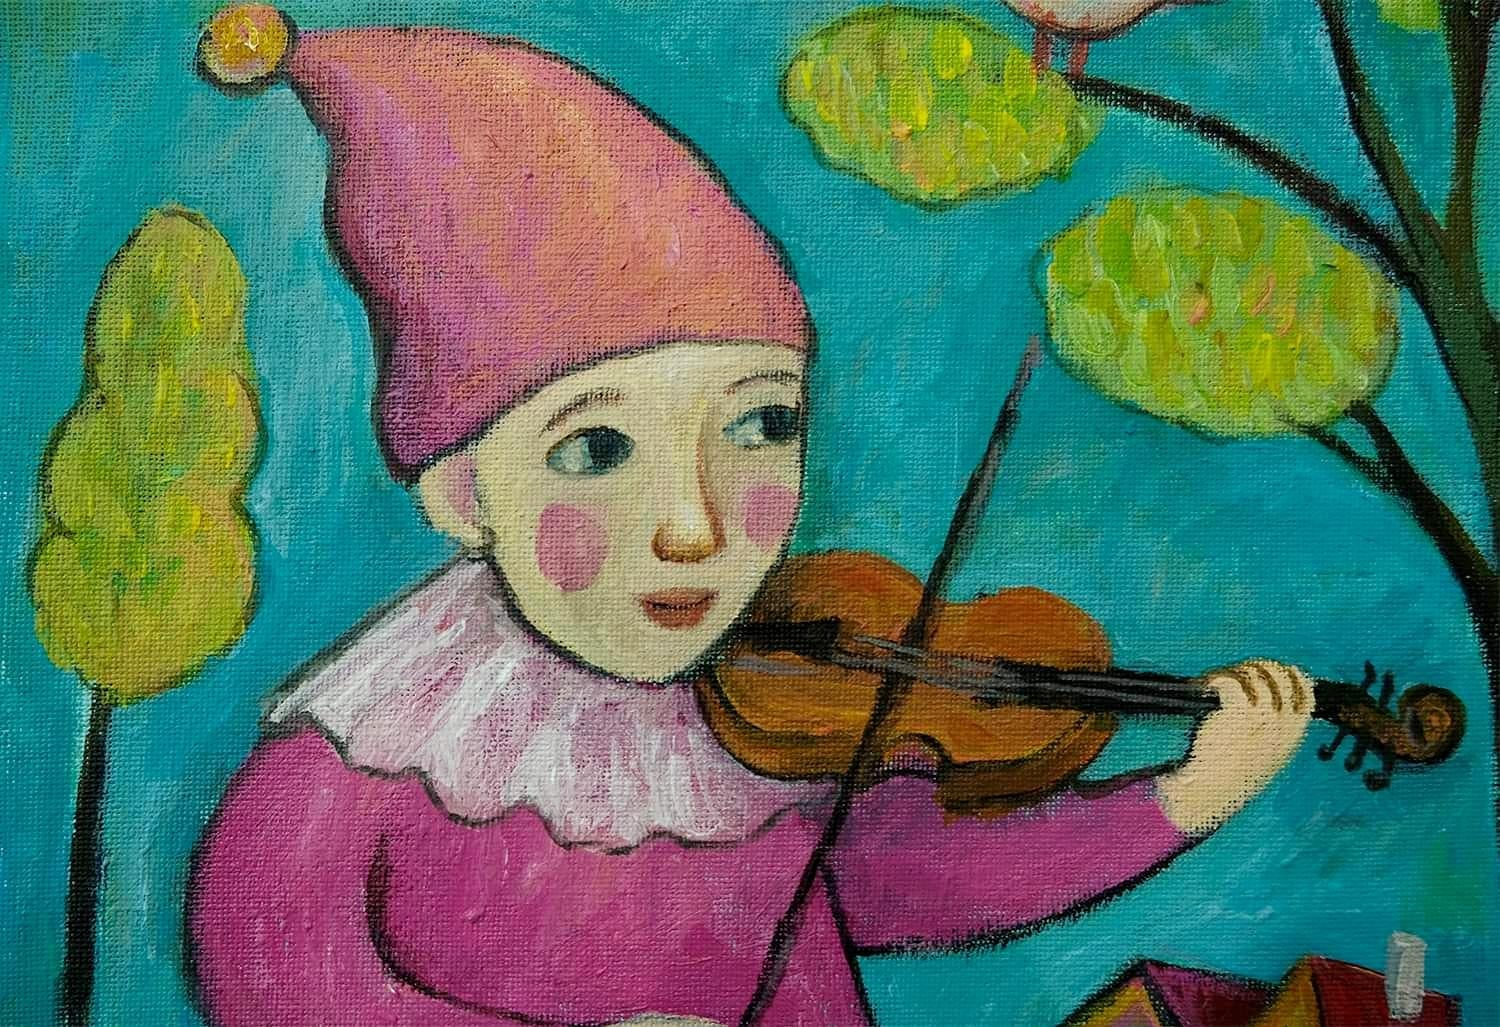 MUSIC FOR A FRIEND - Painting by Natalia Ivanova